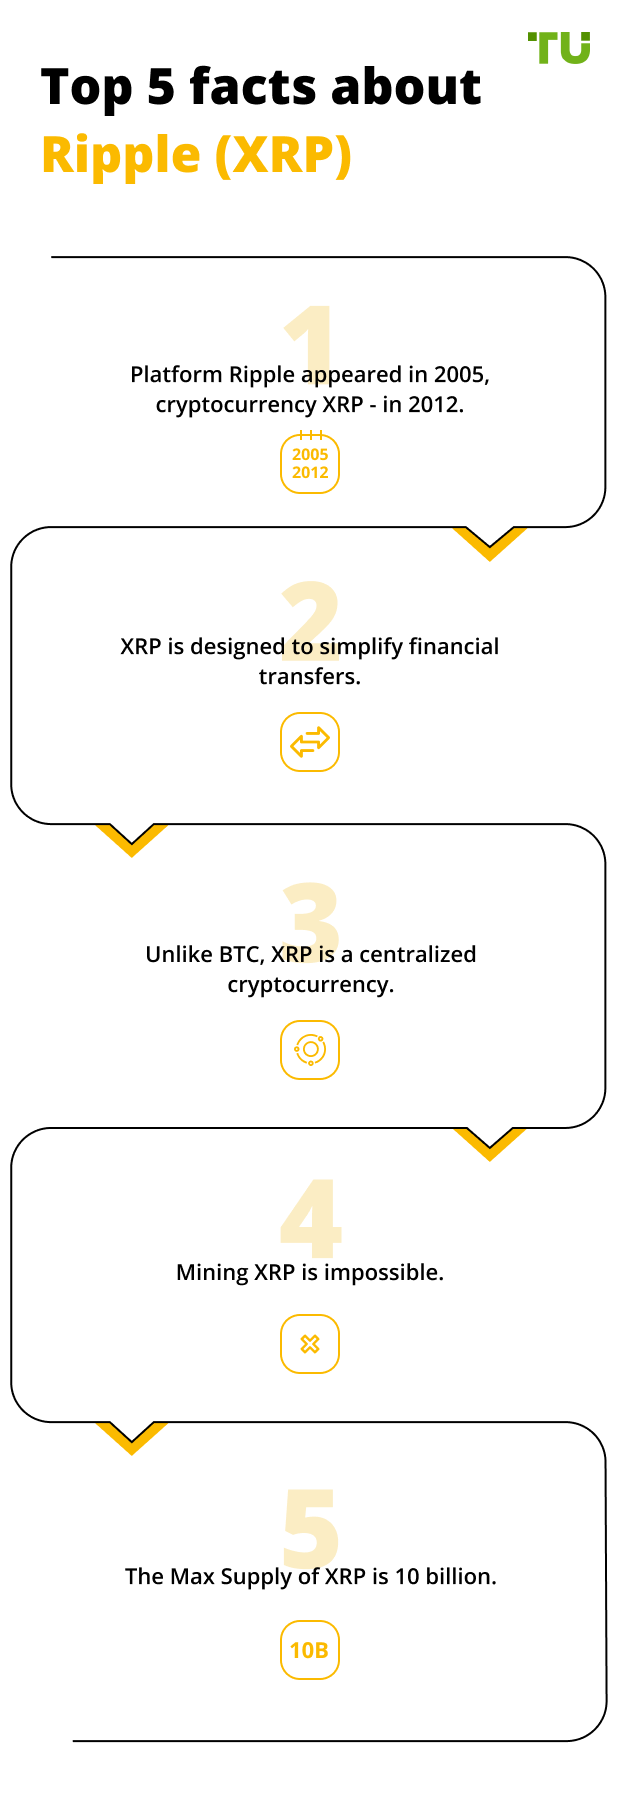 Top 5 facts about Ripple (XRP)